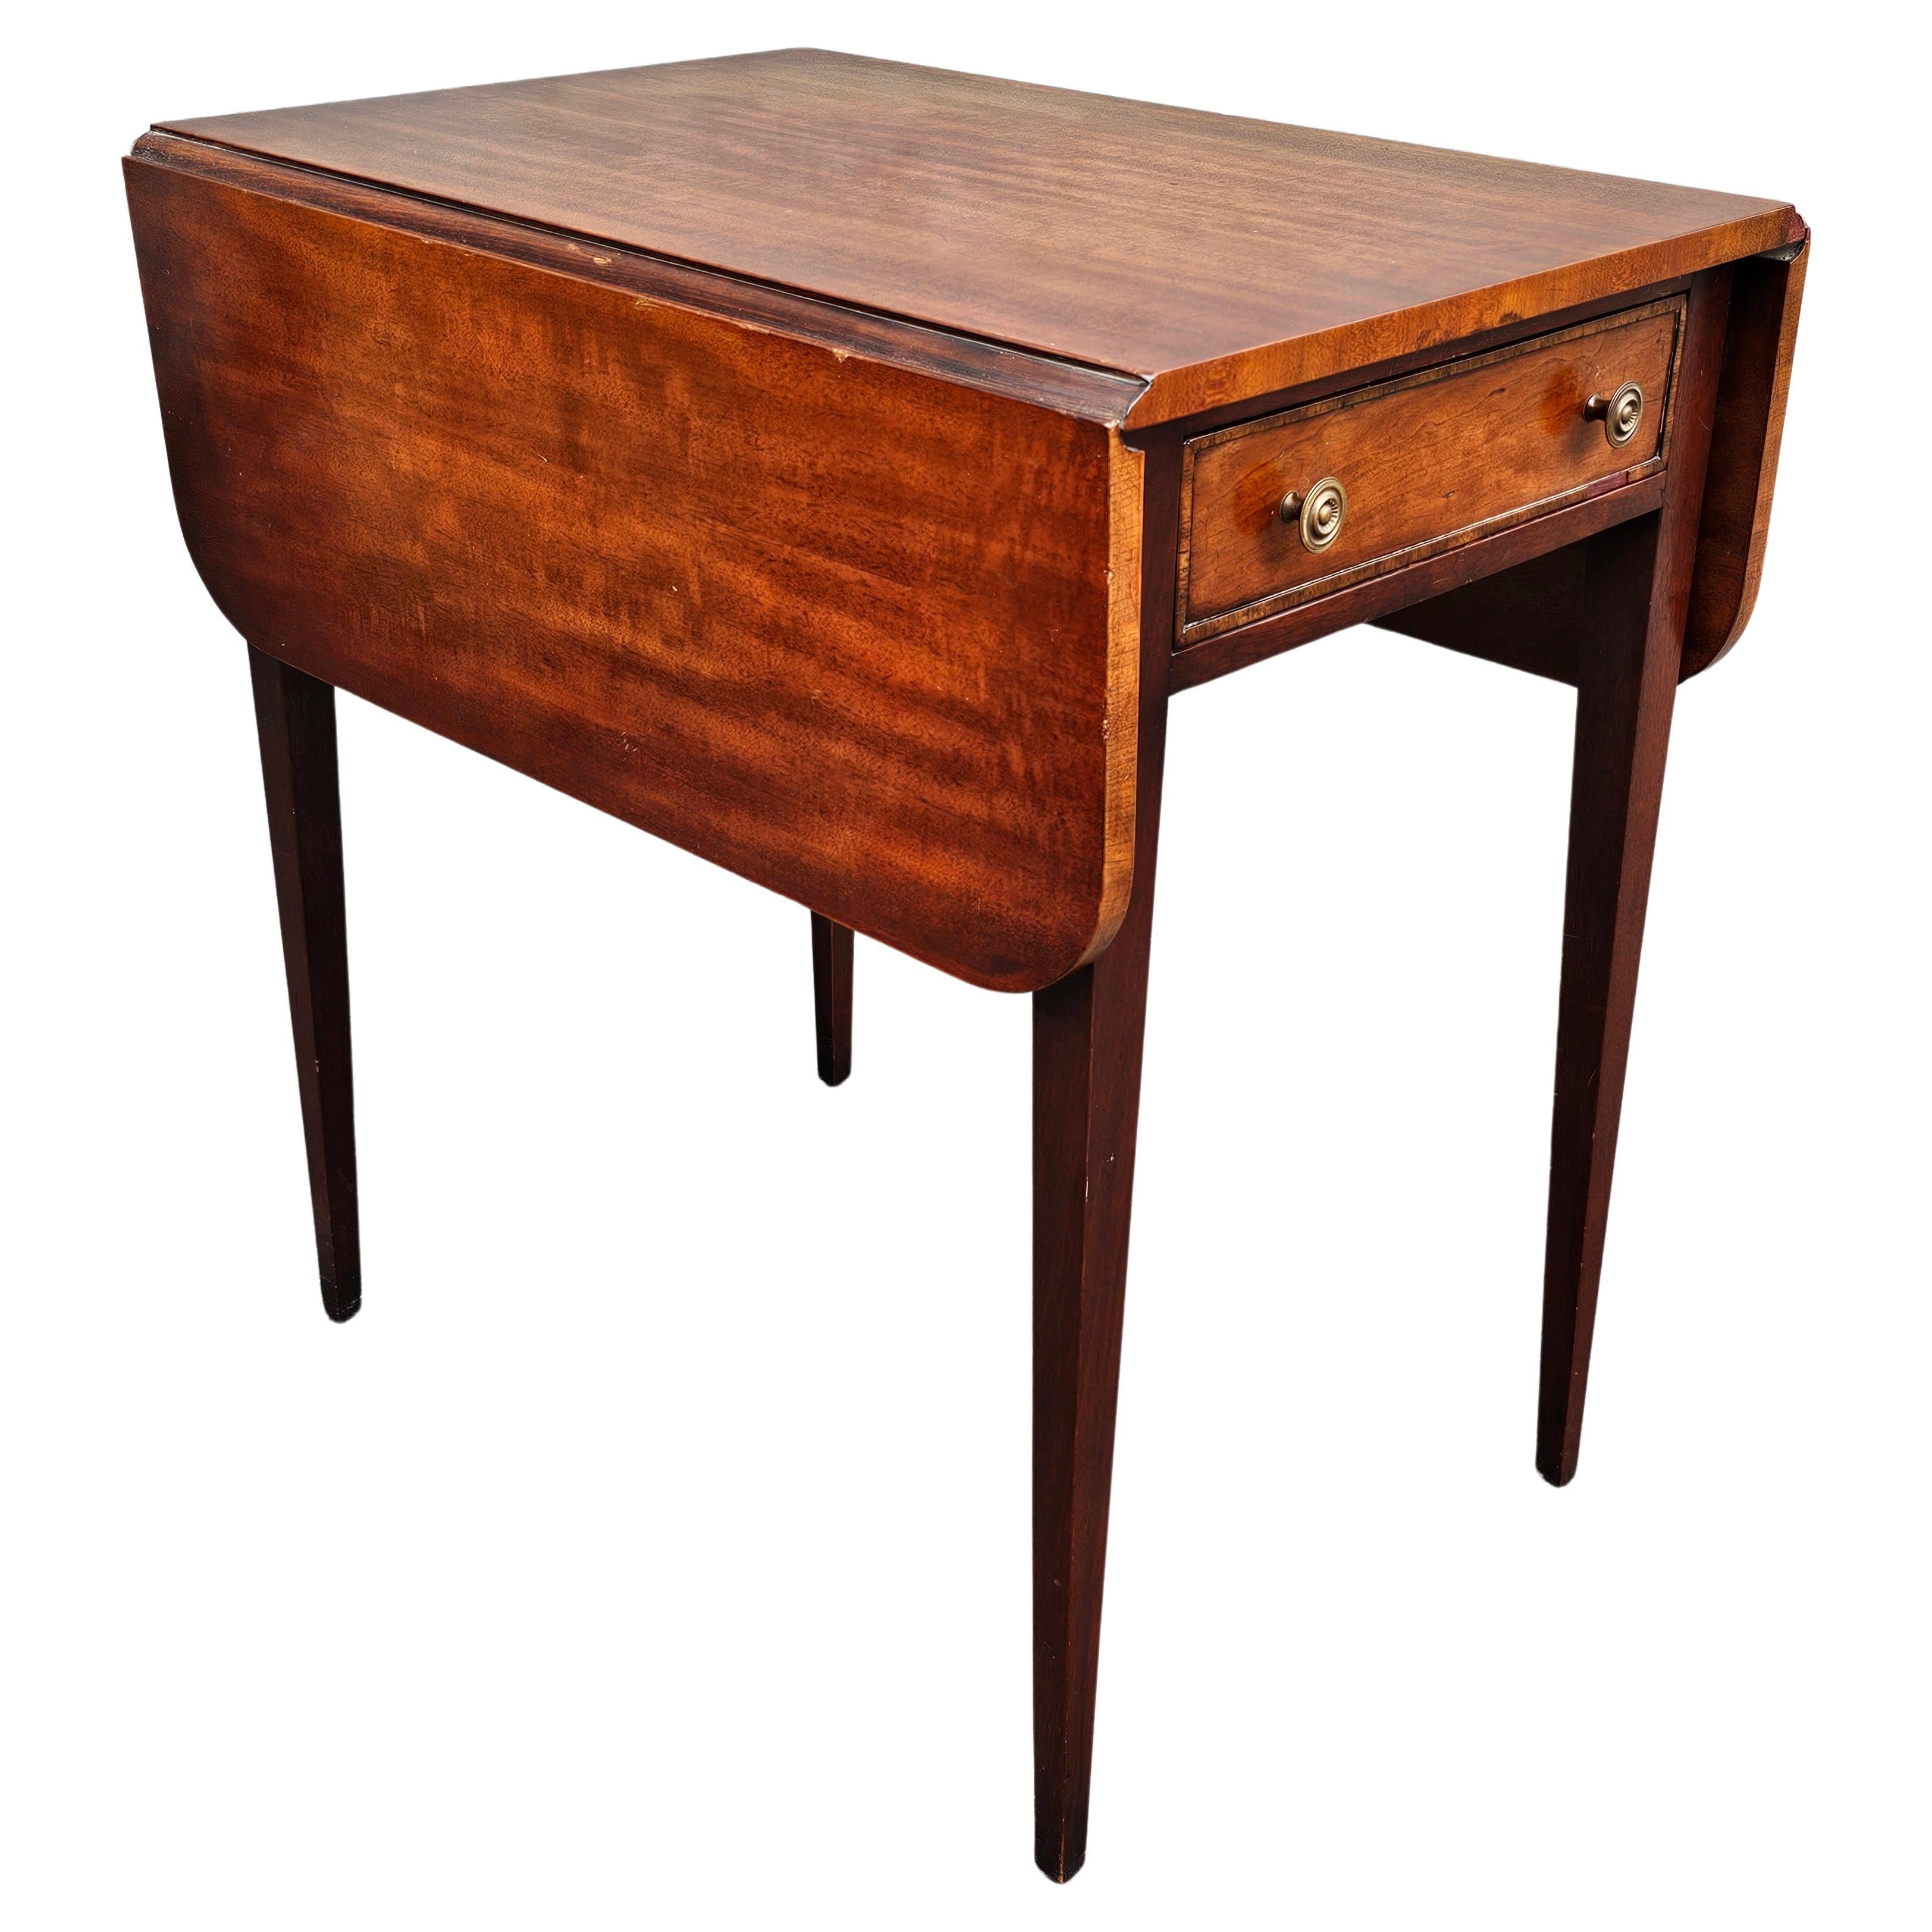 A 19th Century Federal Style Mahogany Pembroke Table . Measures 17.5